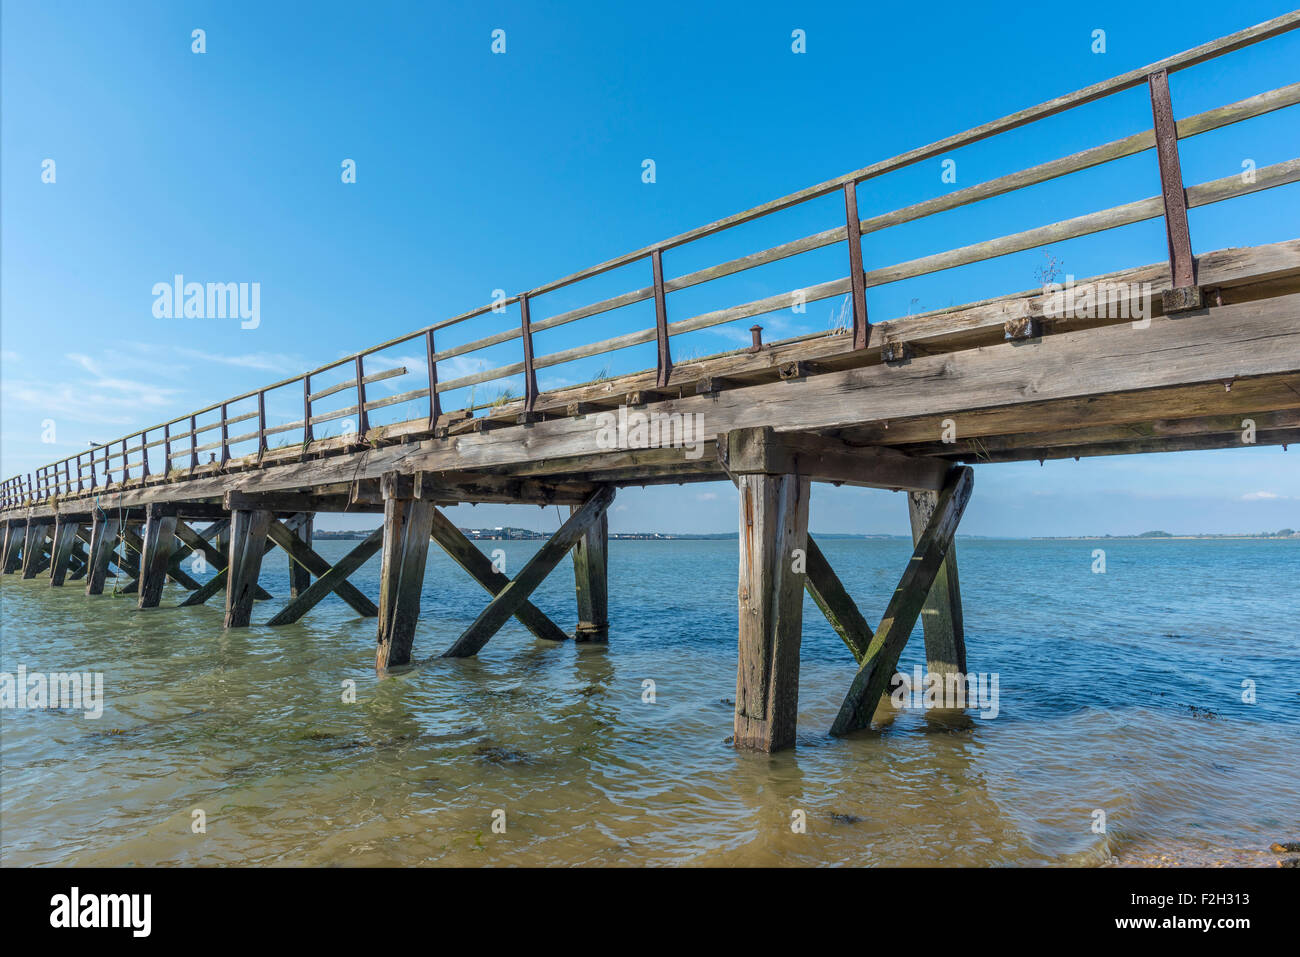 Old weathered wooden jetty on the seafront Stock Photo